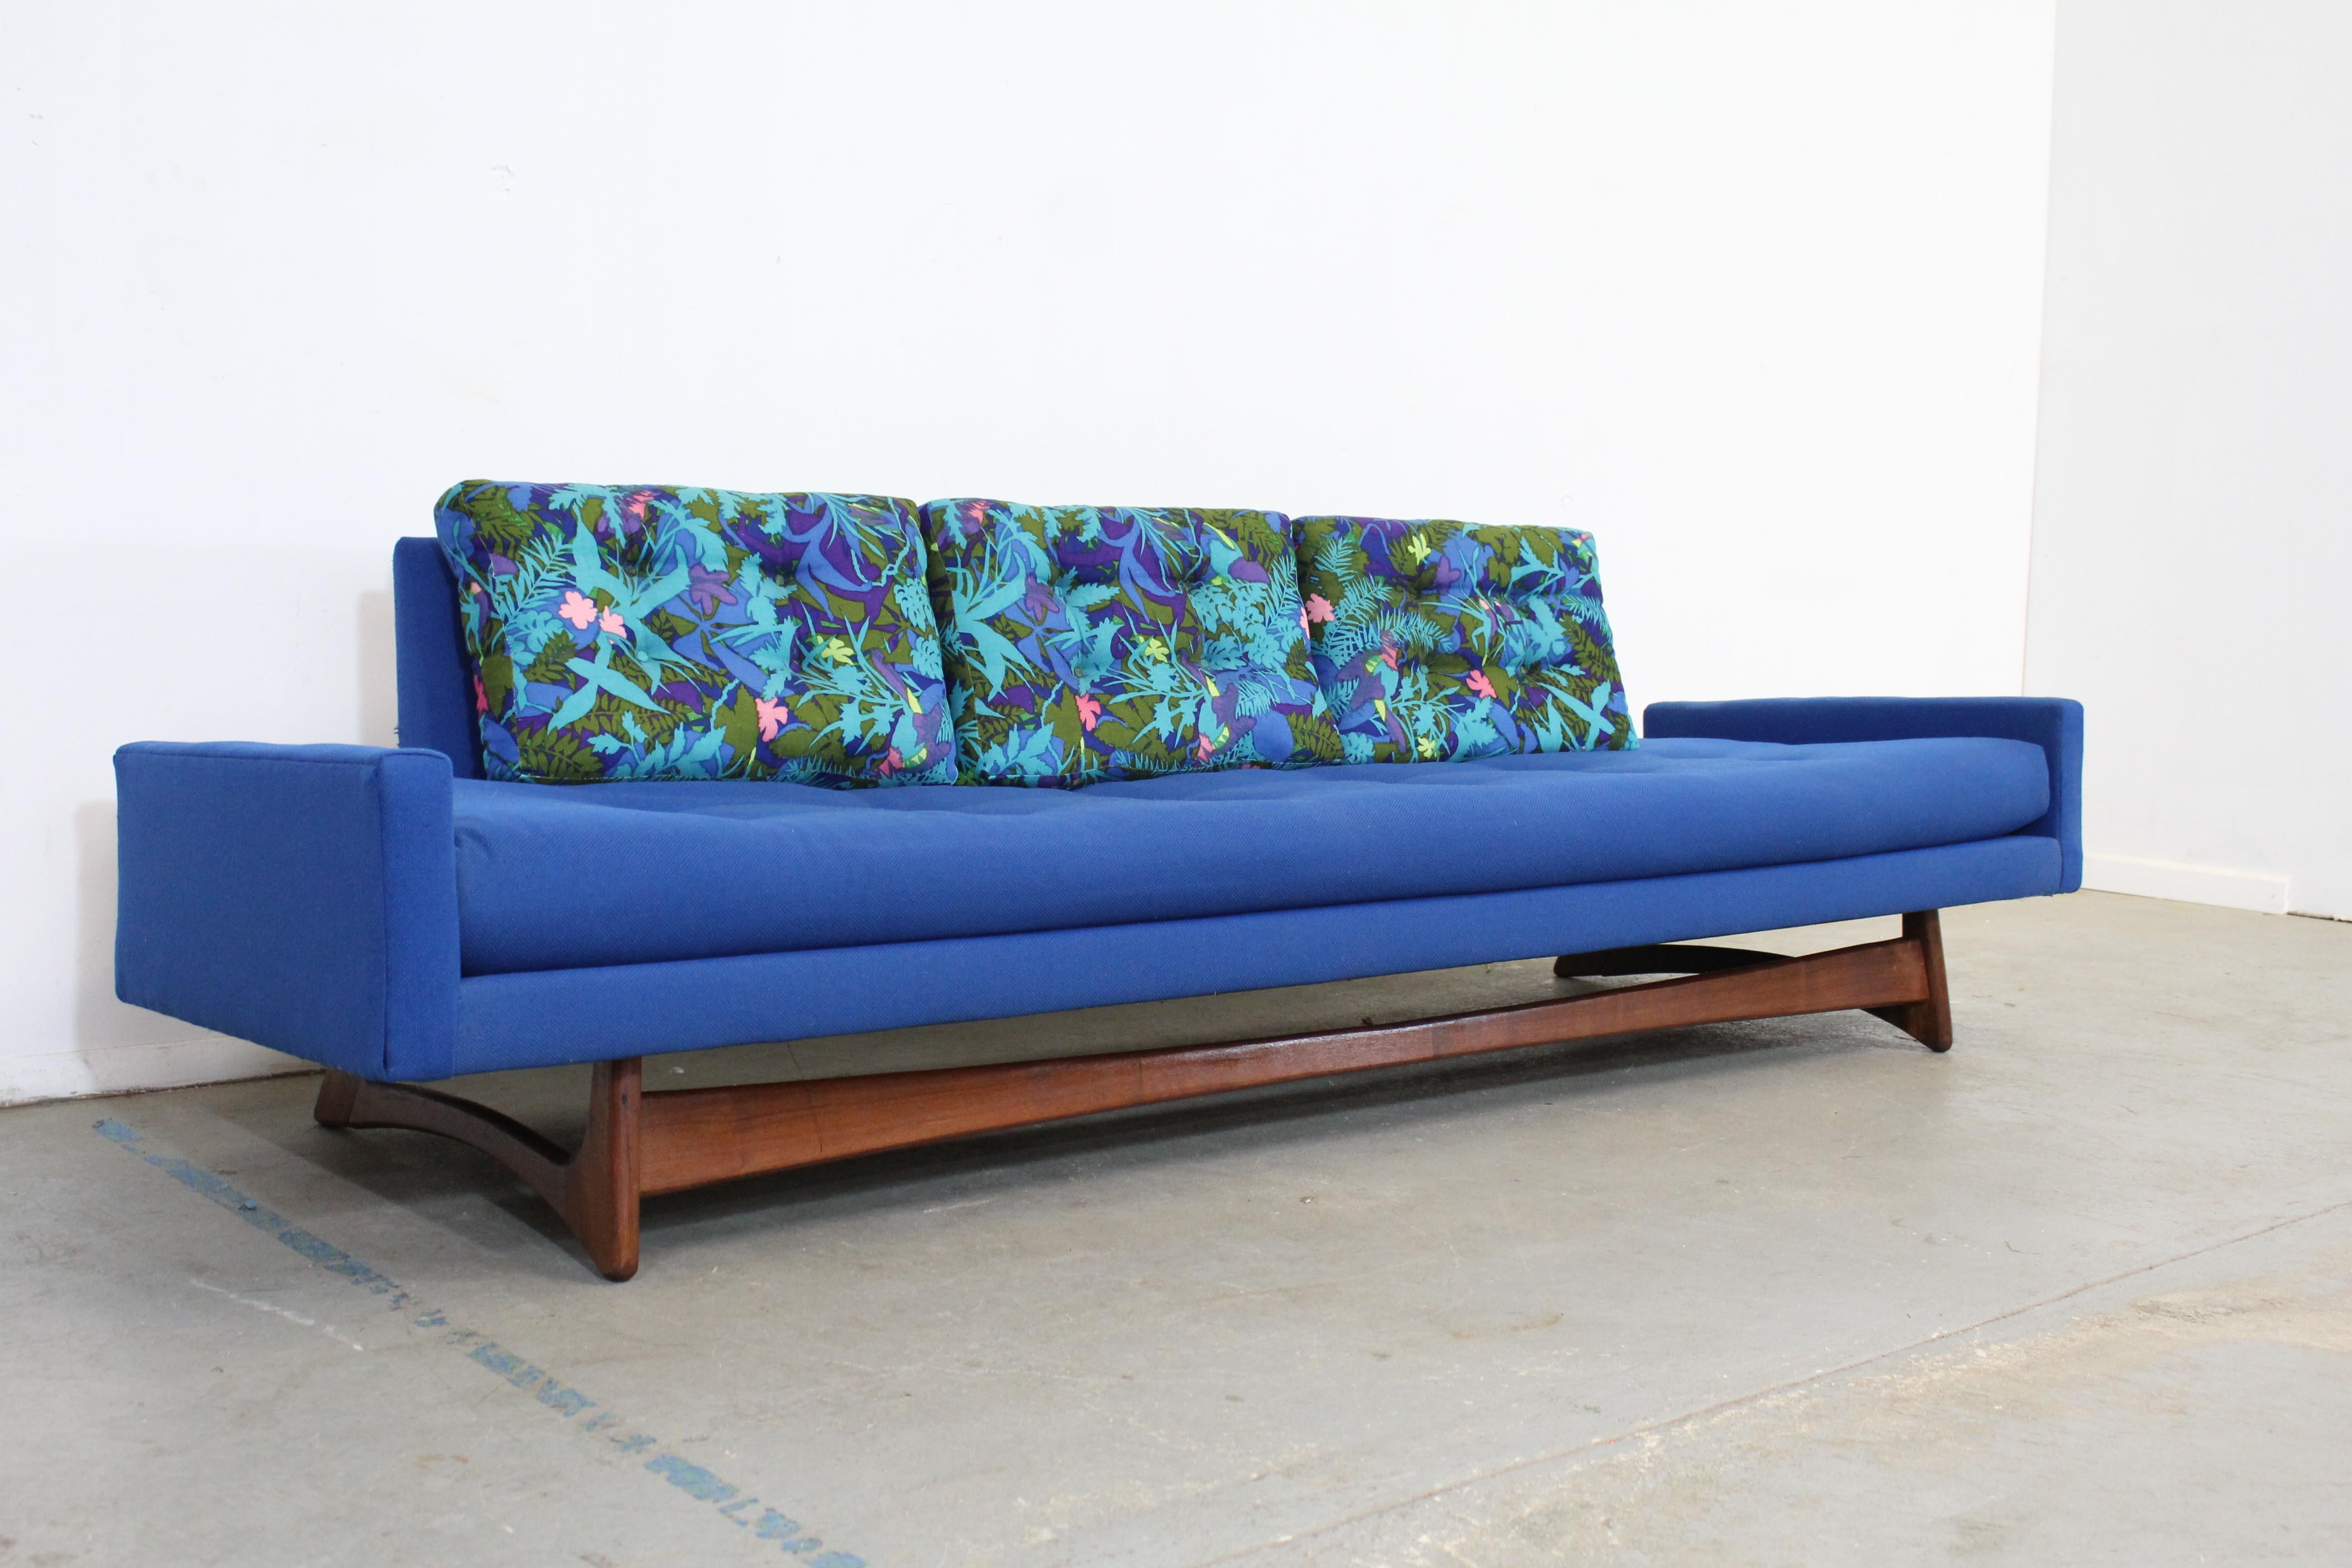 Mid-Century Modern Adrian Pearsall Craft Associates sculptural sofa 2408

 Offered is a beautifully all original 'Gondola' sofa (model 2408) designed by Adrian Pearsall for Craft Associates. Features sculpted wood legs and original textured